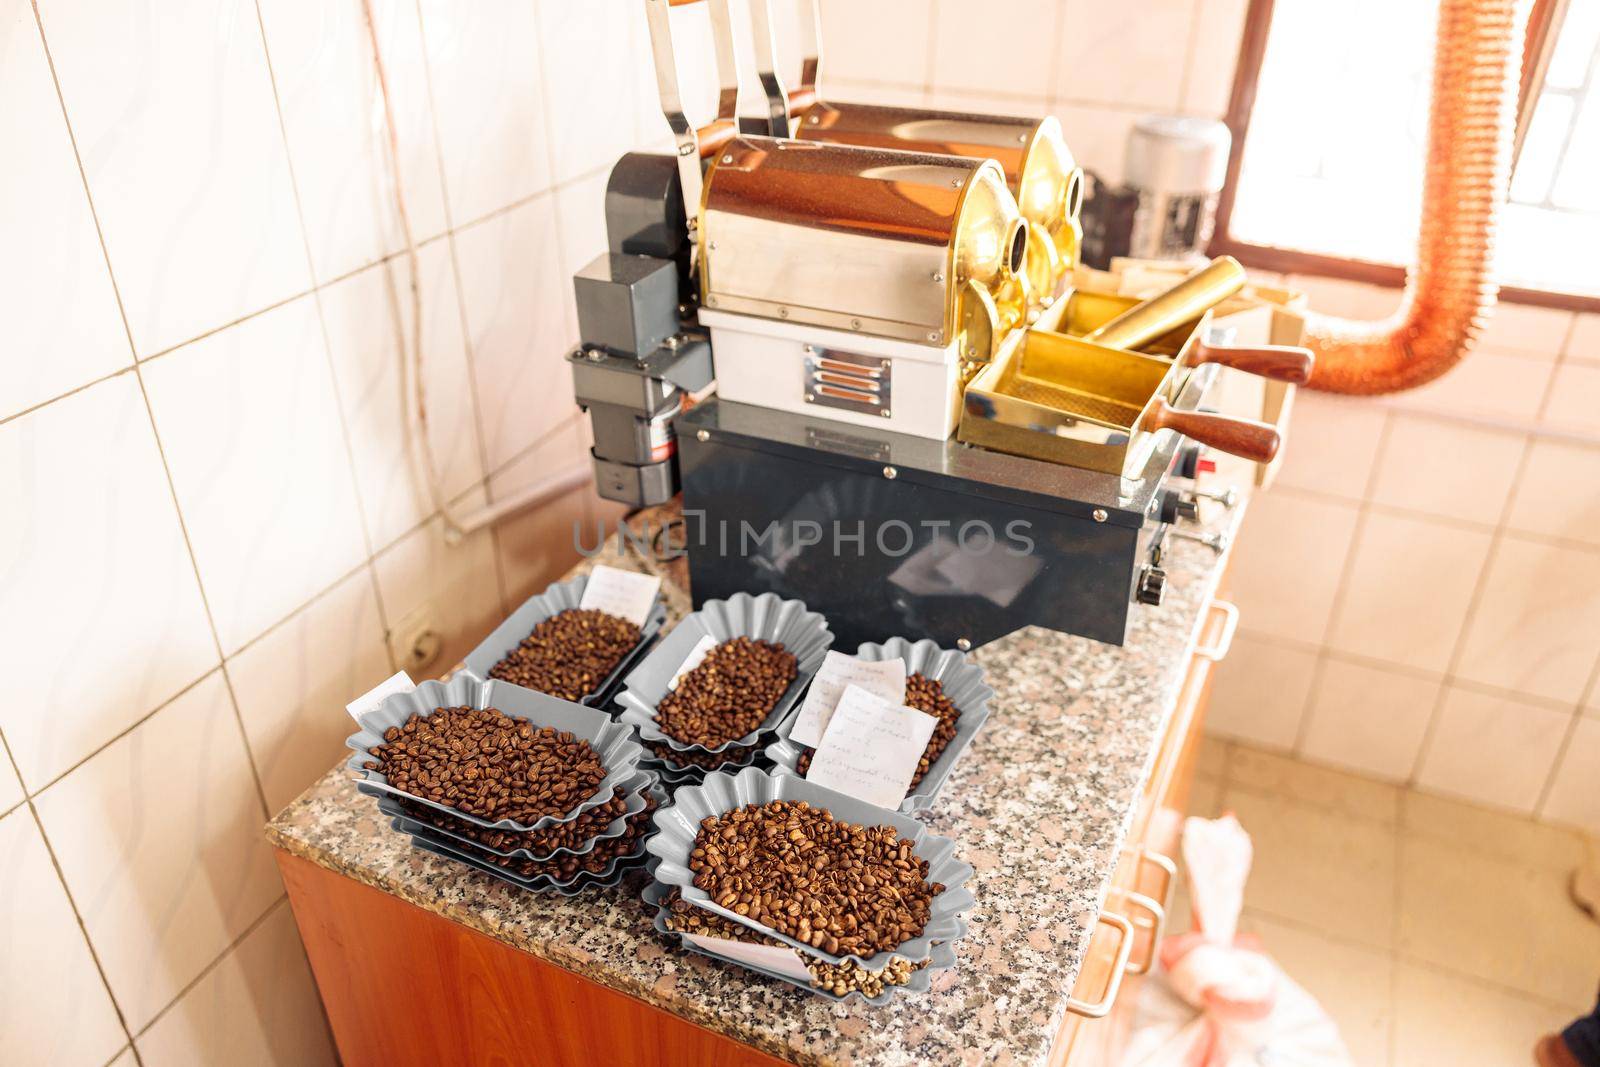 Top view of coffee machine and bowls with roasted coffee beans